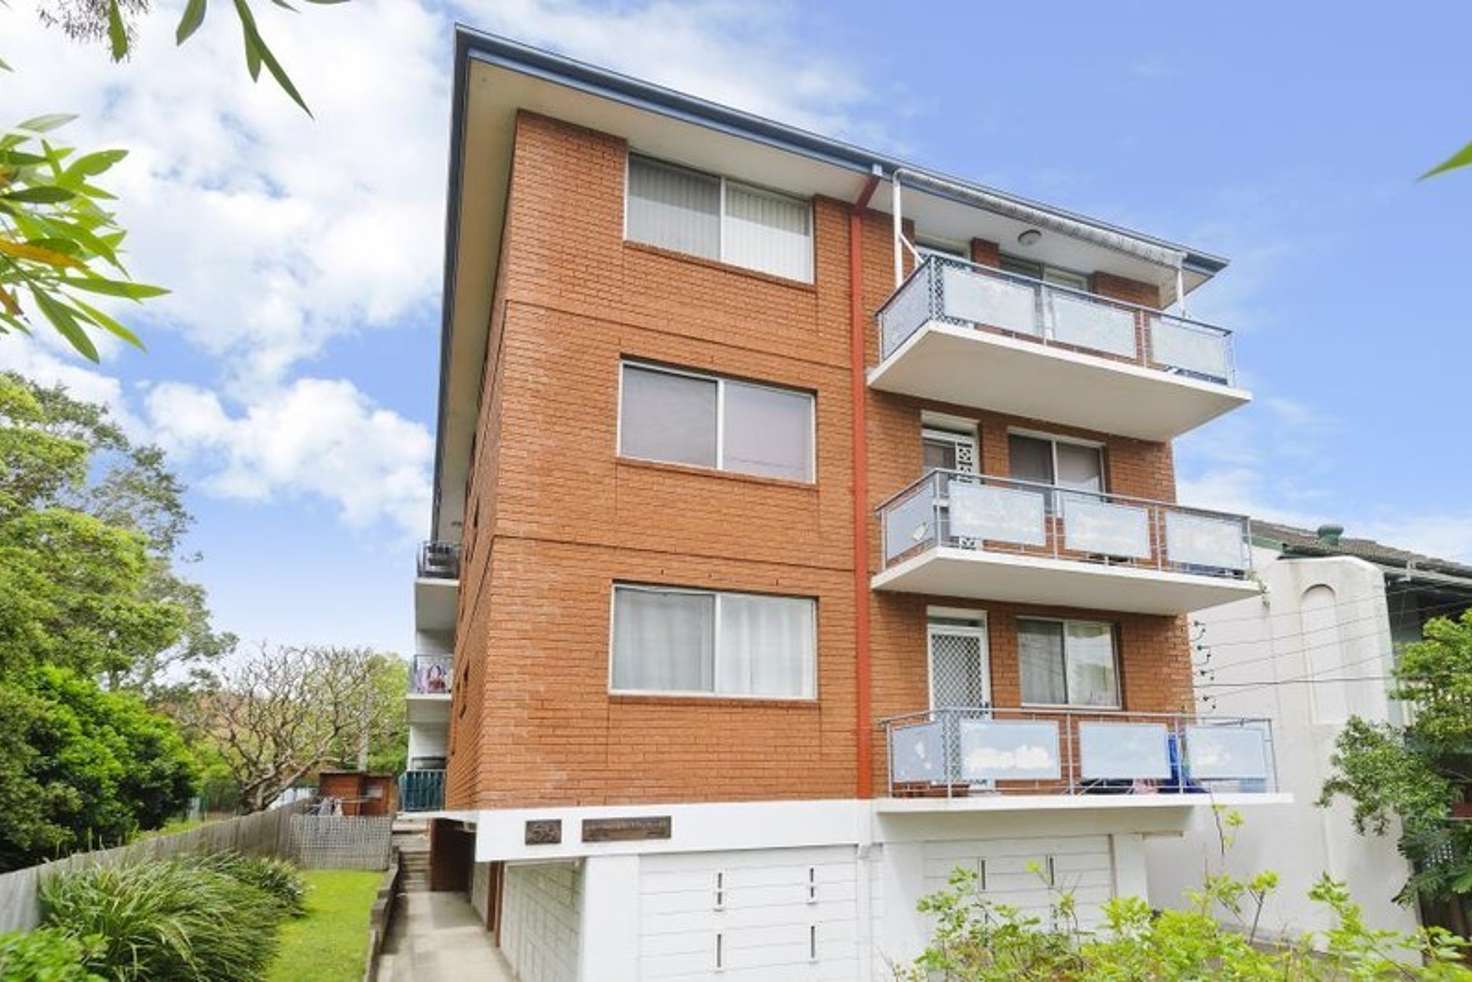 Main view of Homely apartment listing, 9/59 Tebbutt Street, Leichhardt NSW 2040